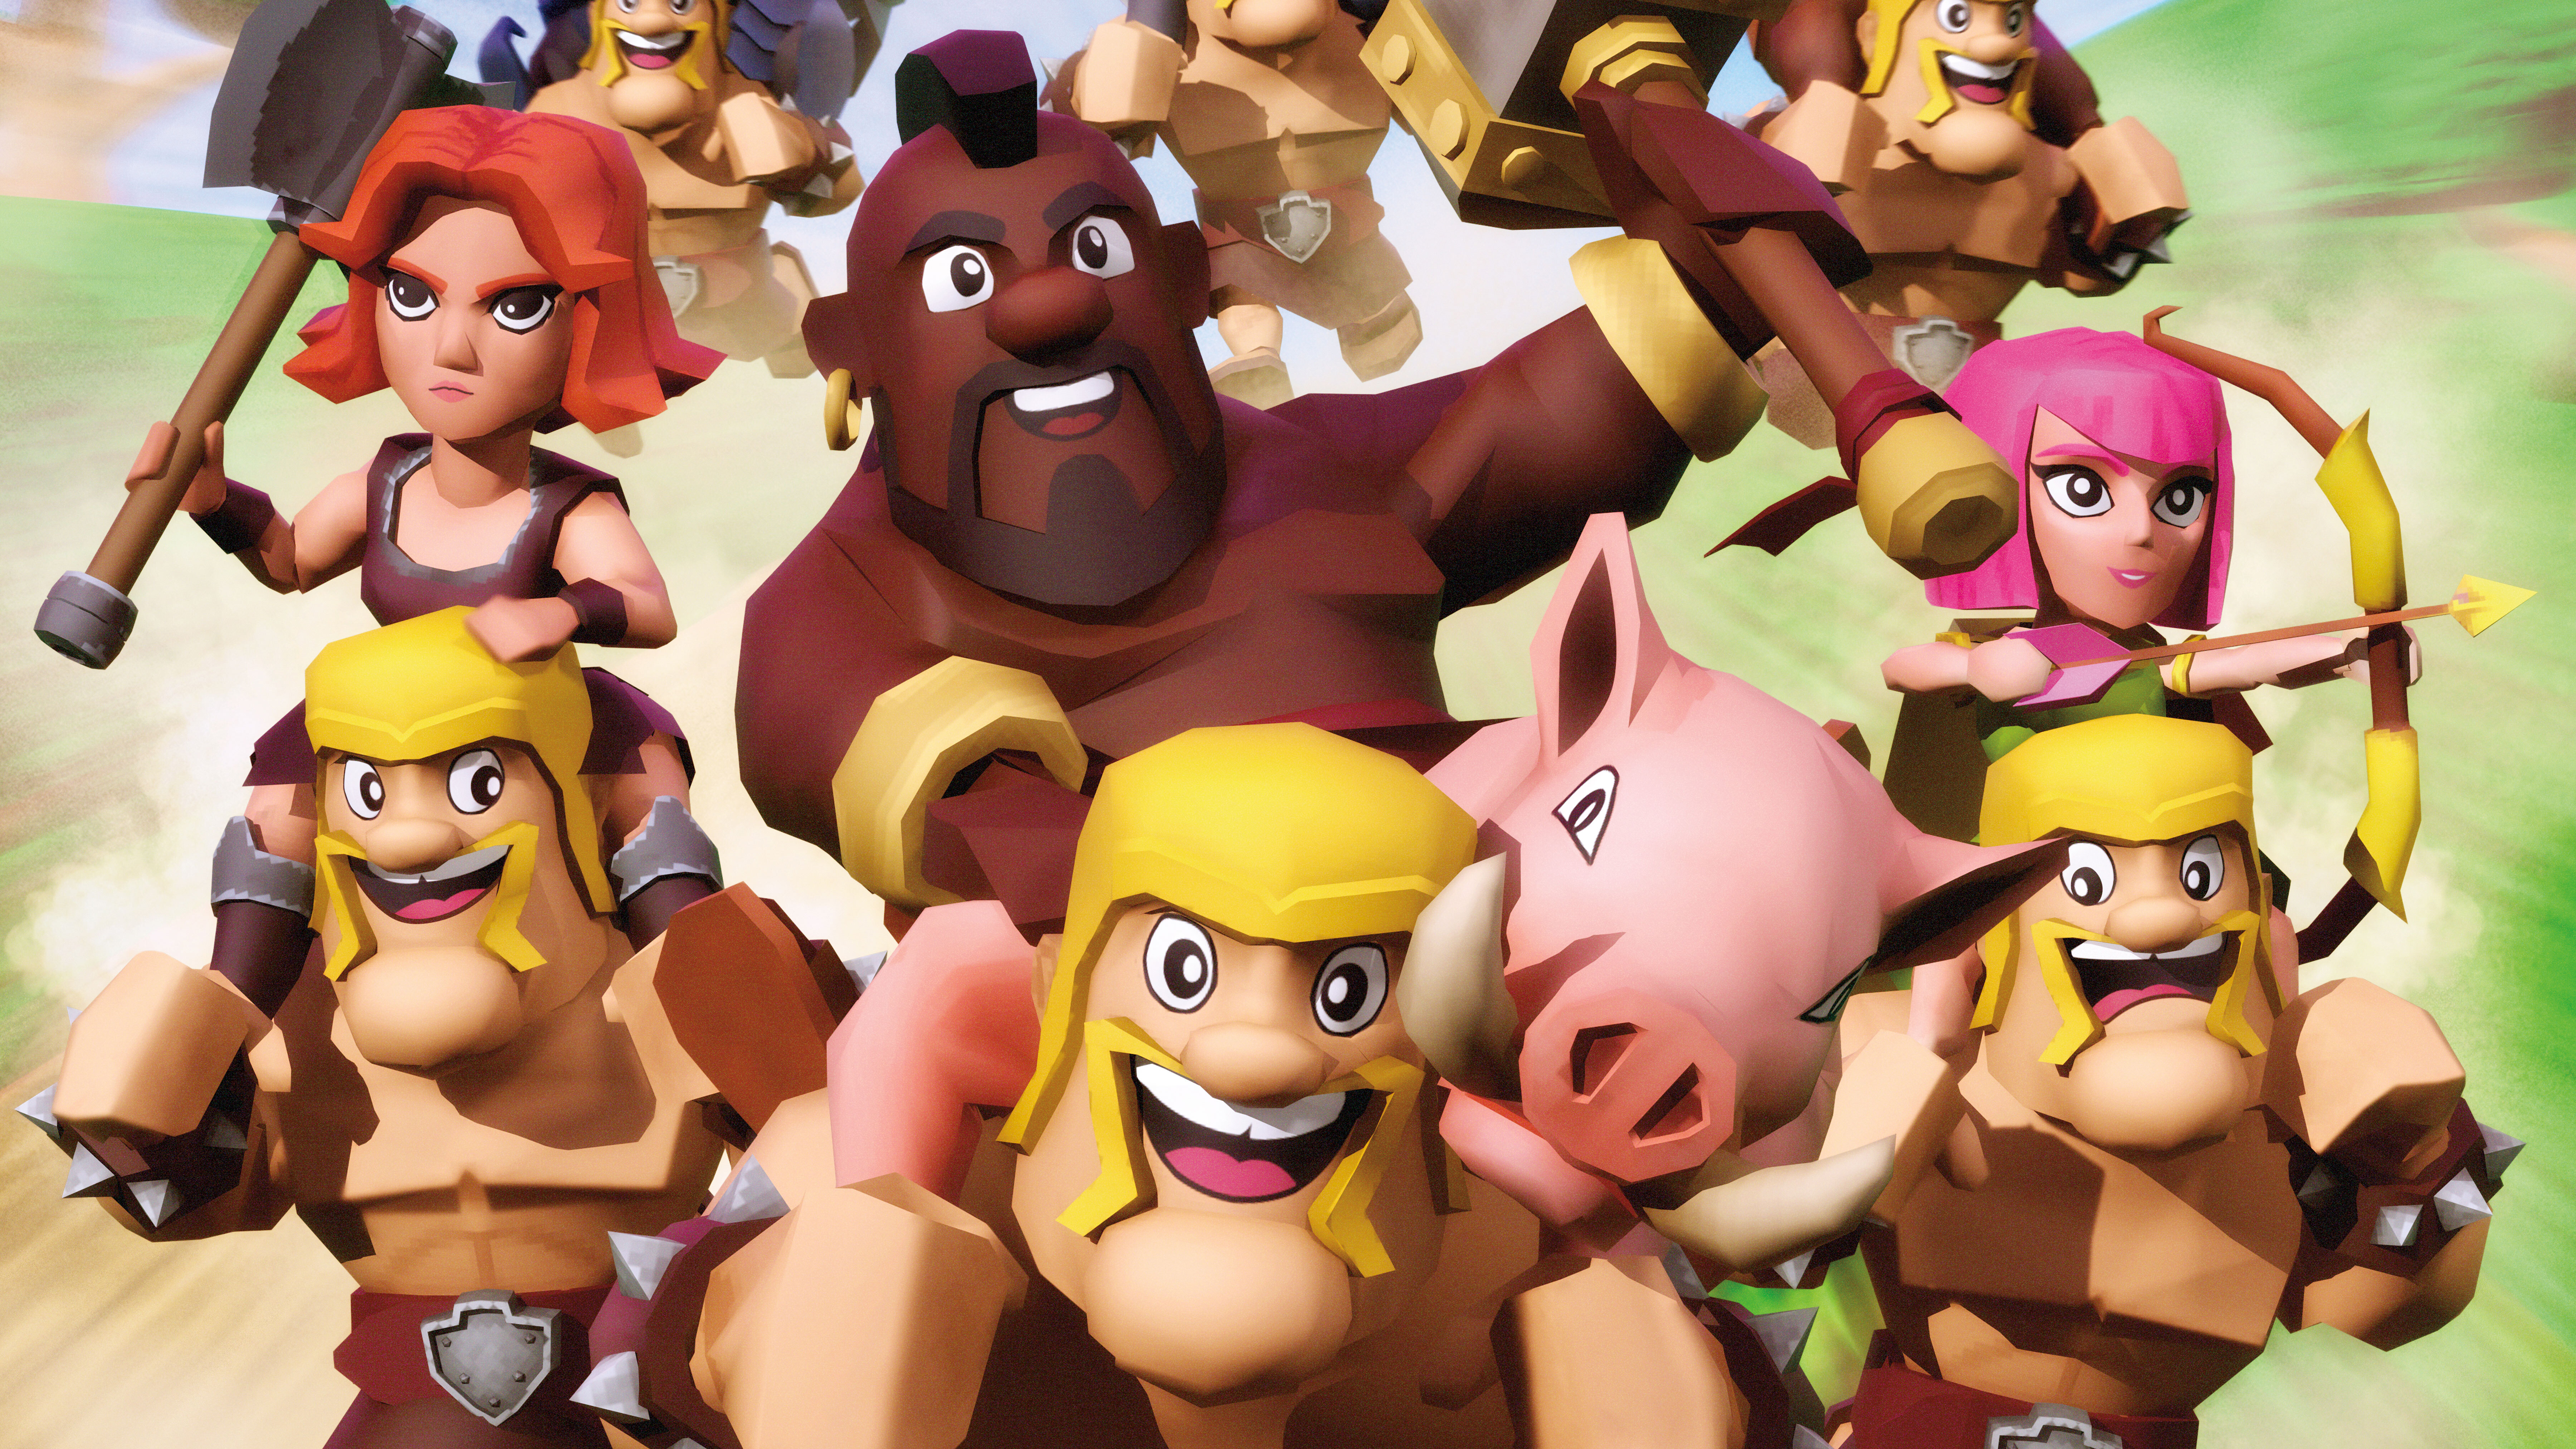 andrew fellowes add photos of clash of clans photo